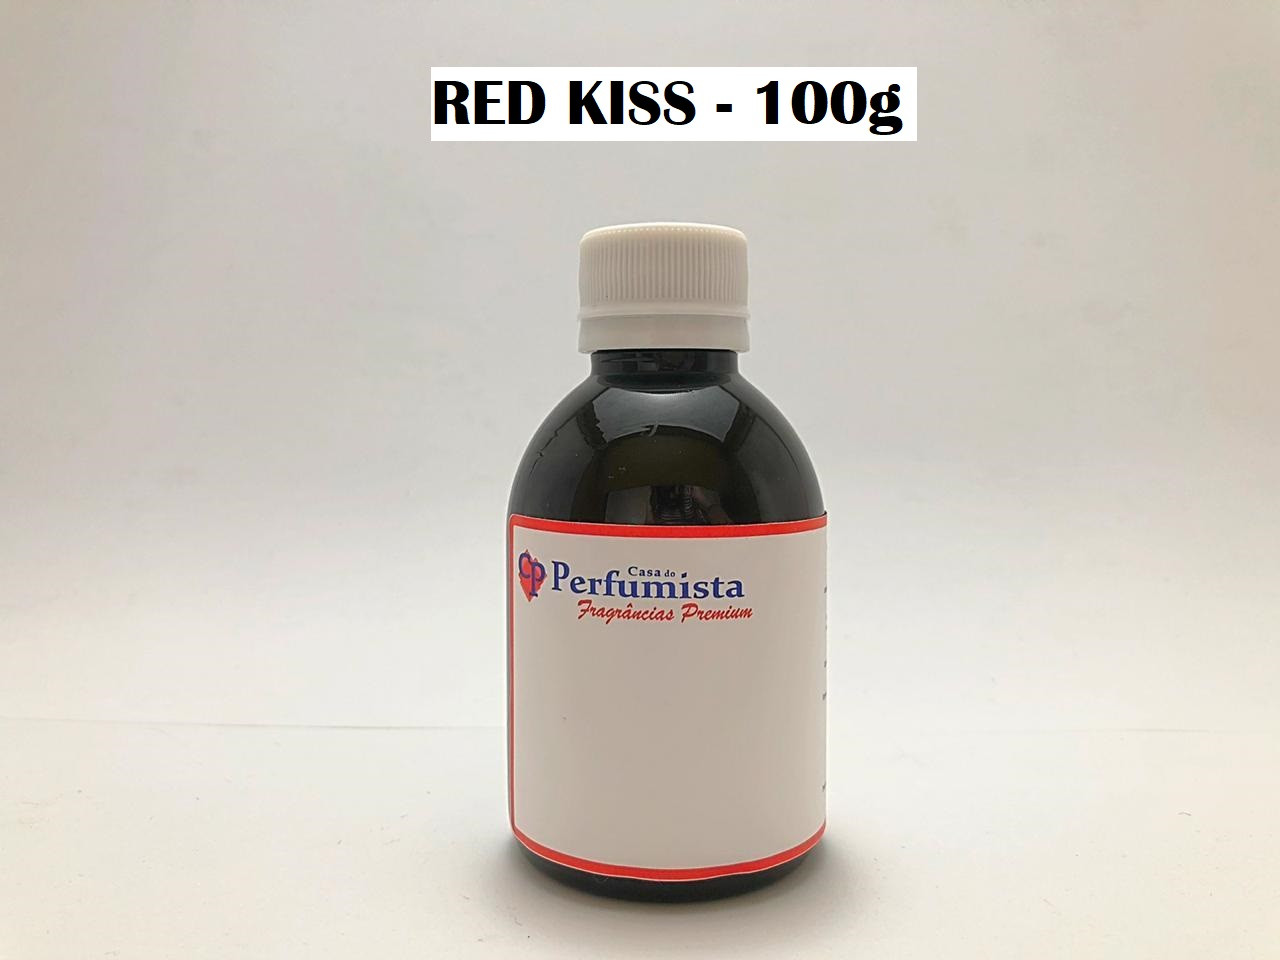 RED KISS - 100g